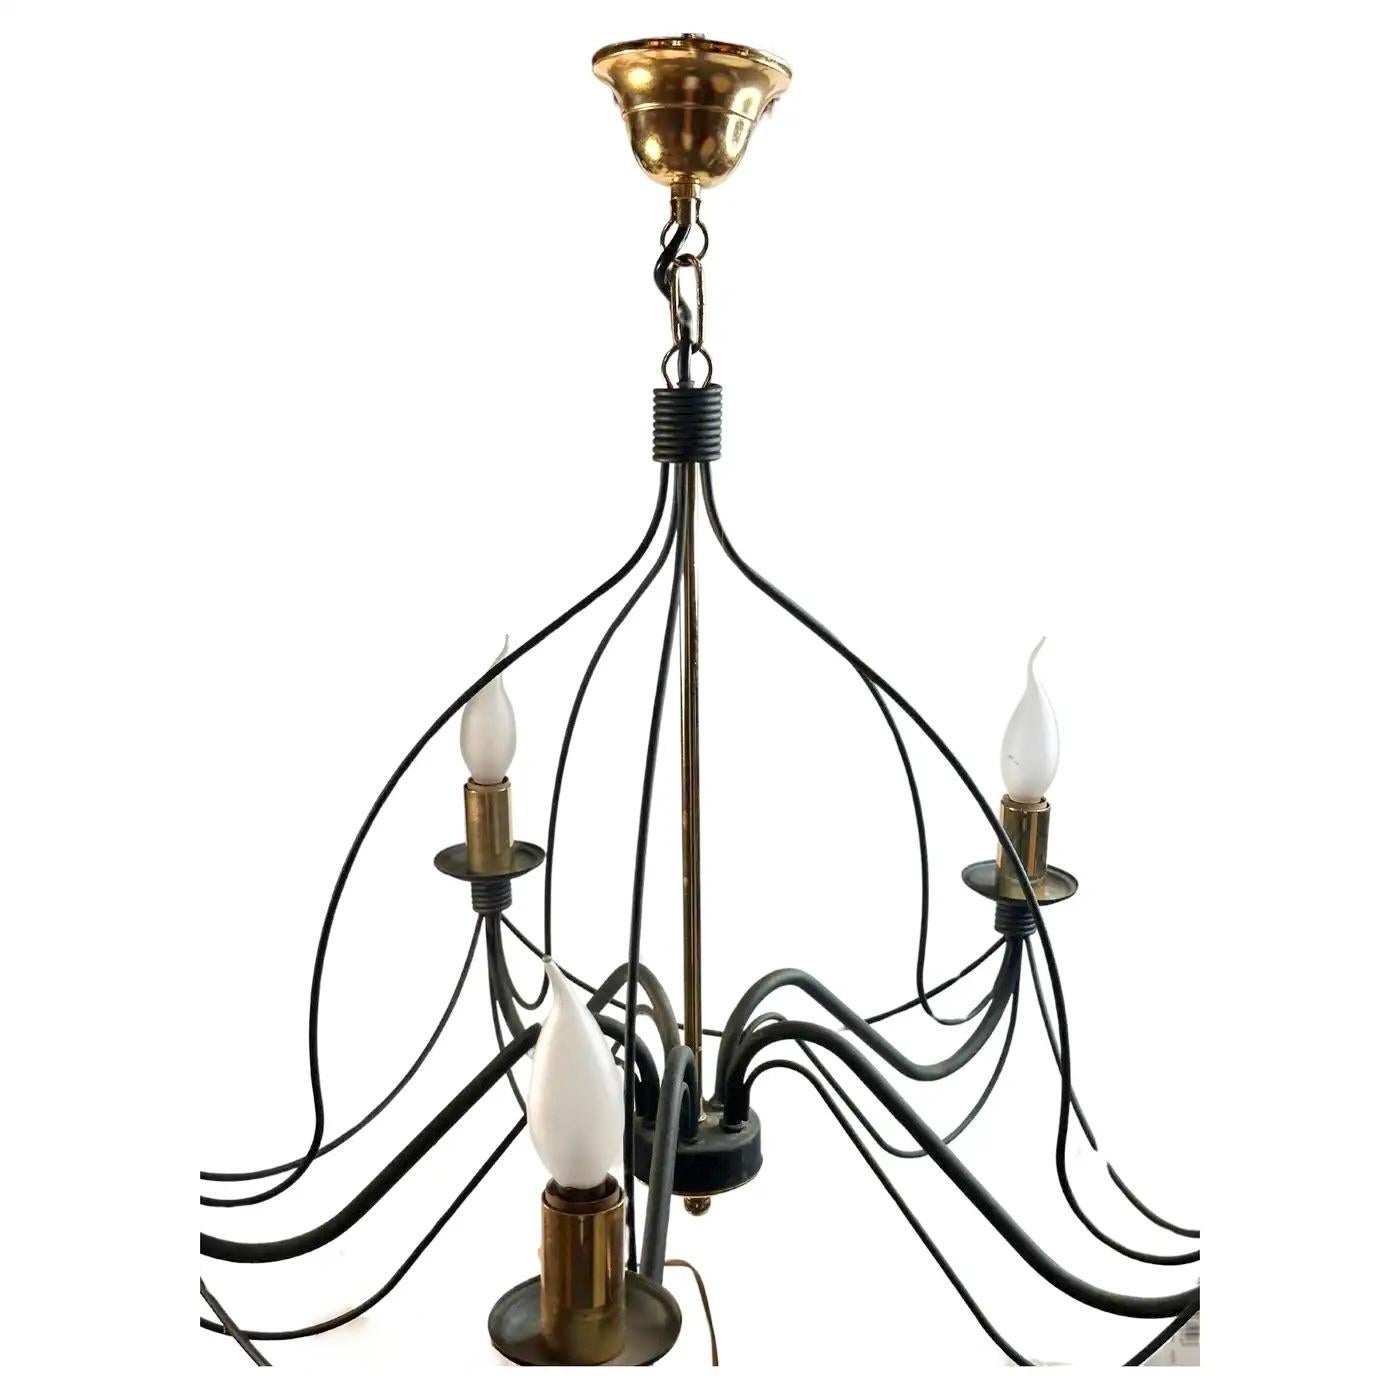 Elegant and classic chandelier finished in a verdigris look with brass accents. Functions as is with five E14 / 110 volt light bulbs. Can take up to 40 watts each bulb. Beautiful colored metal chandelier.
It gives the room a beautiful warm light and